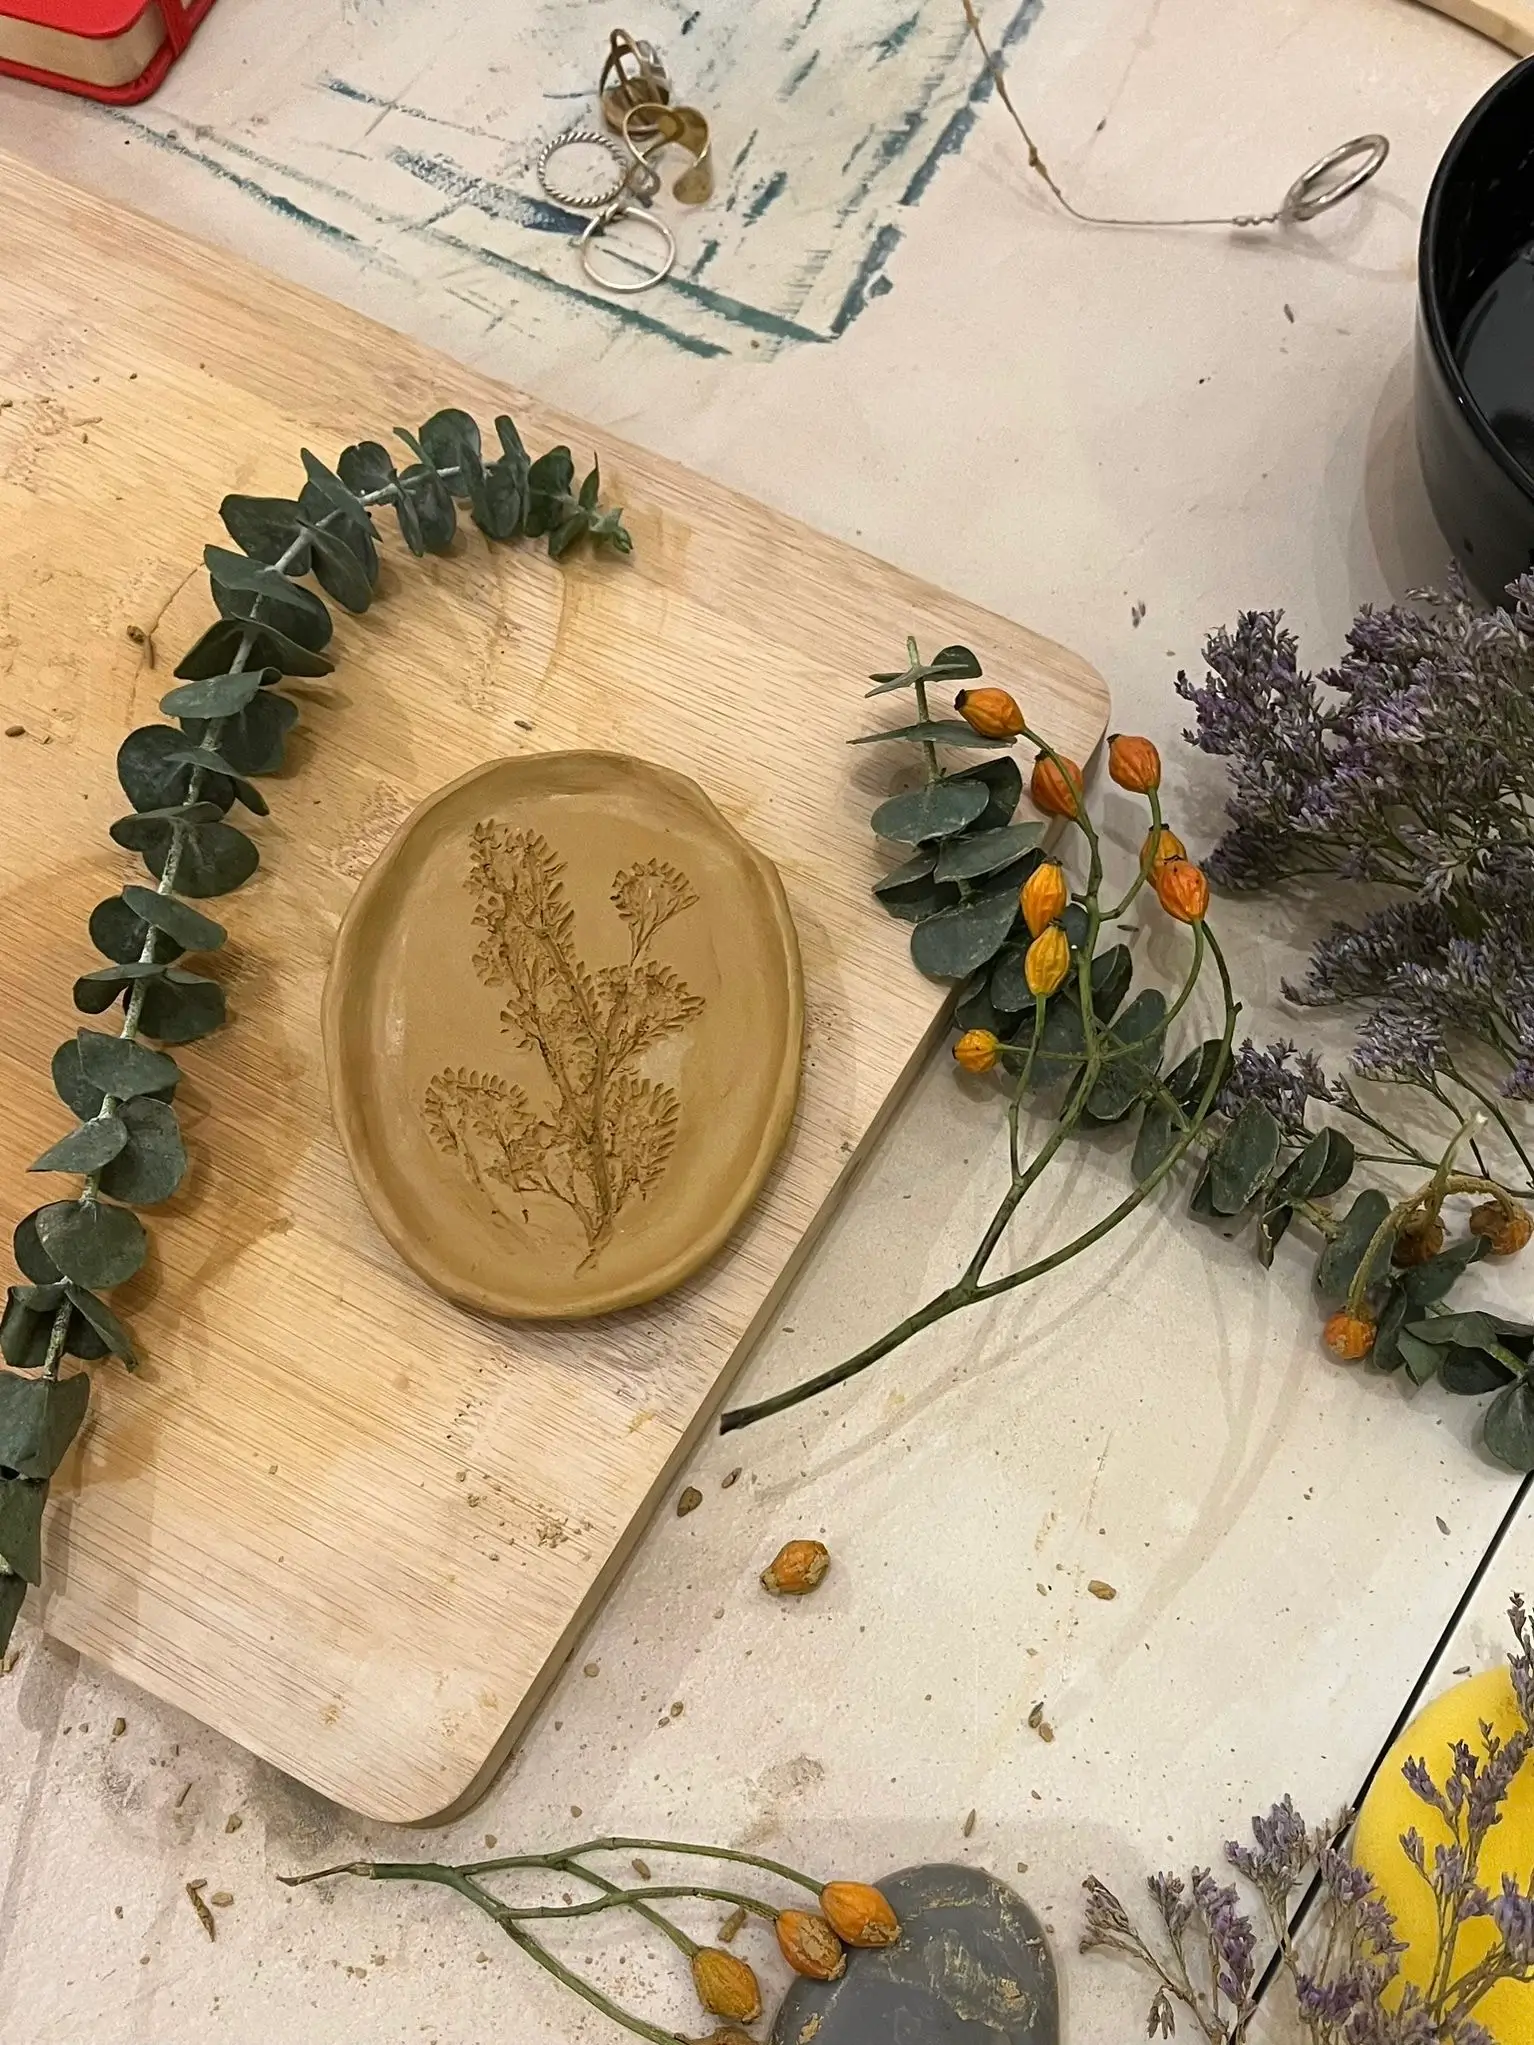 Bloom into Spring with our Flower Press Ceramics Workshop